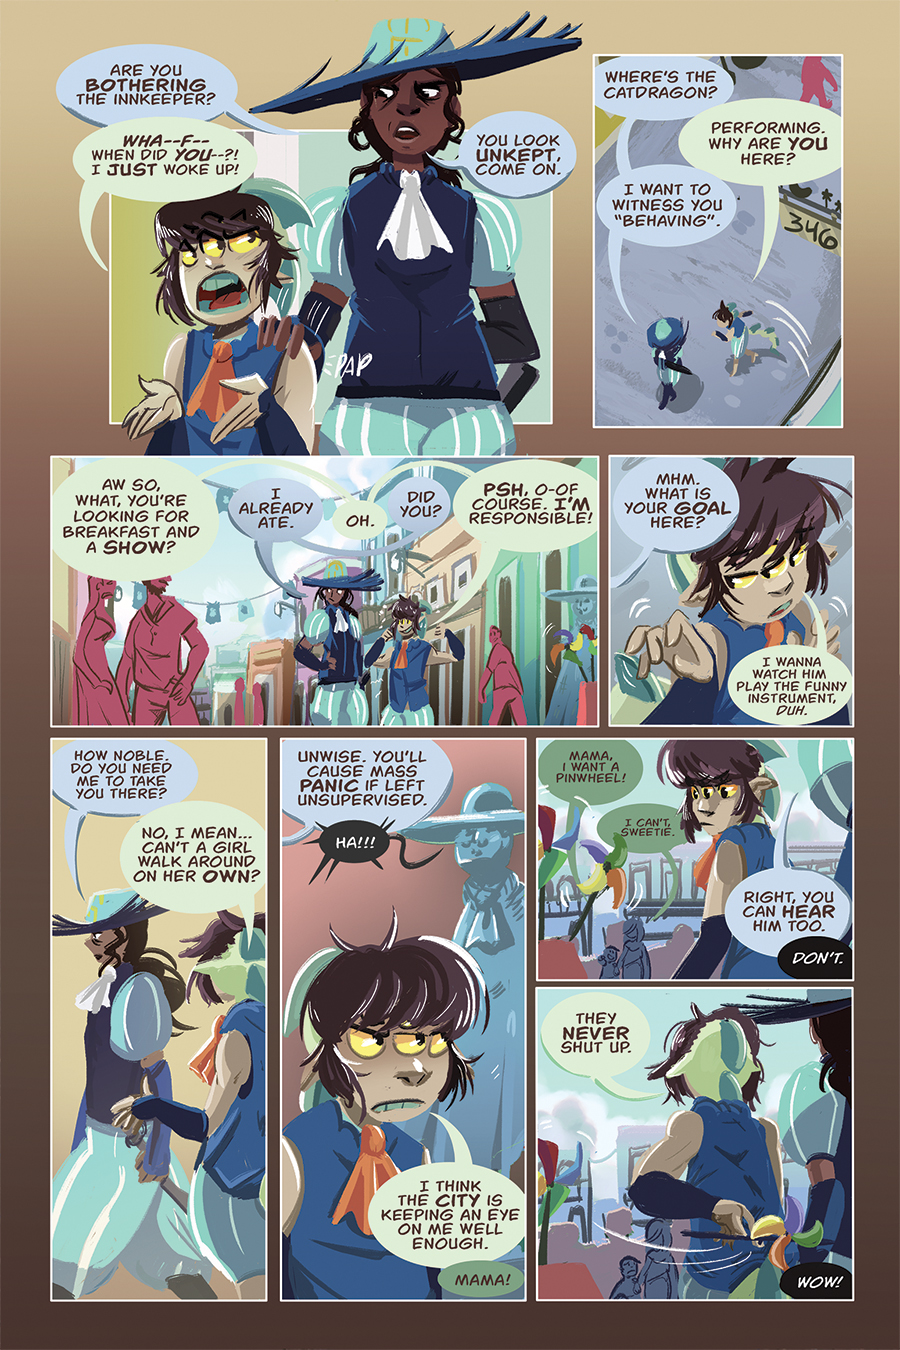 Chapter 8, page 4